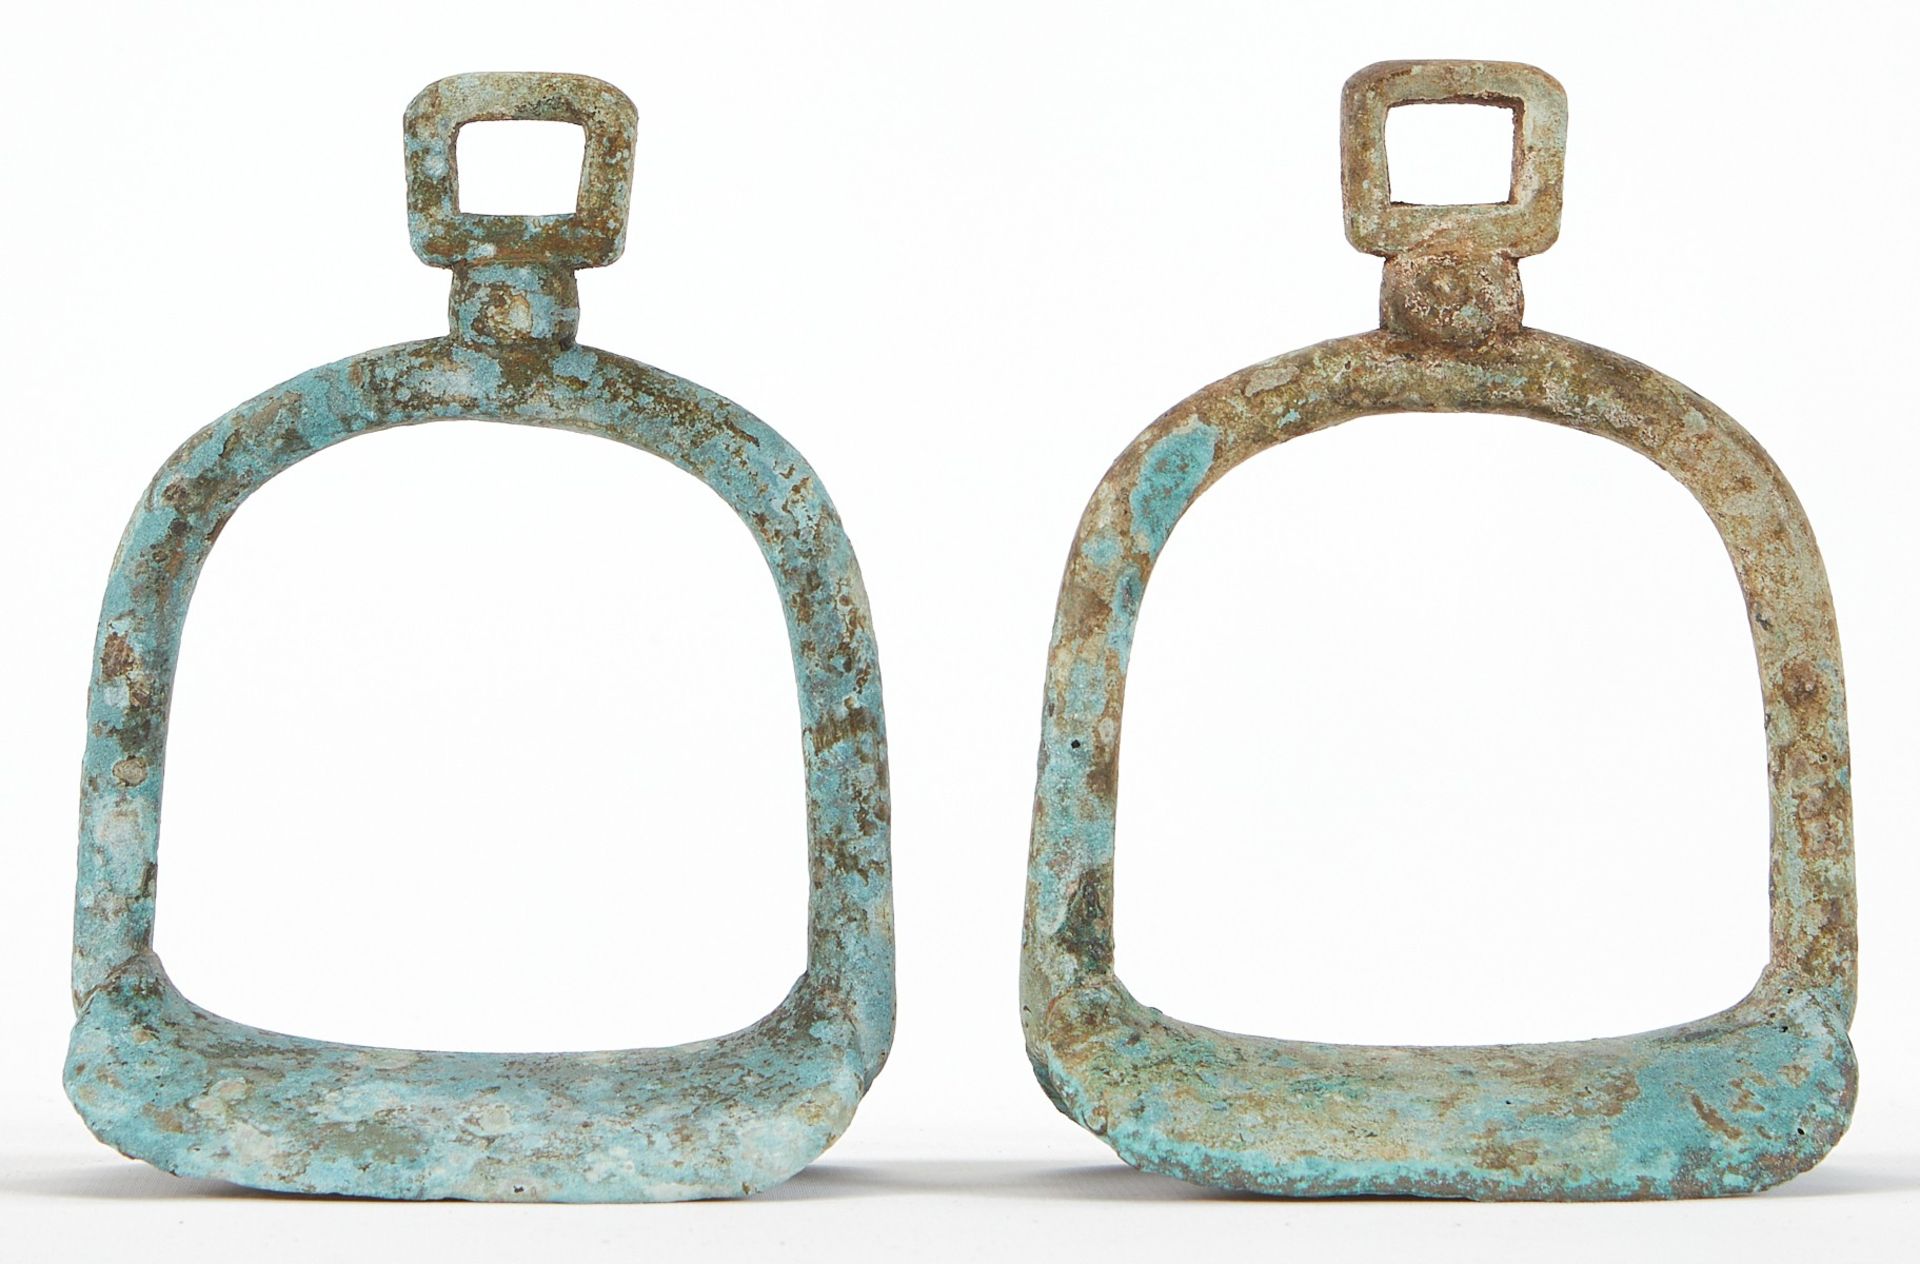 Pr Early Chinese Bronze Stirrups - Image 2 of 6